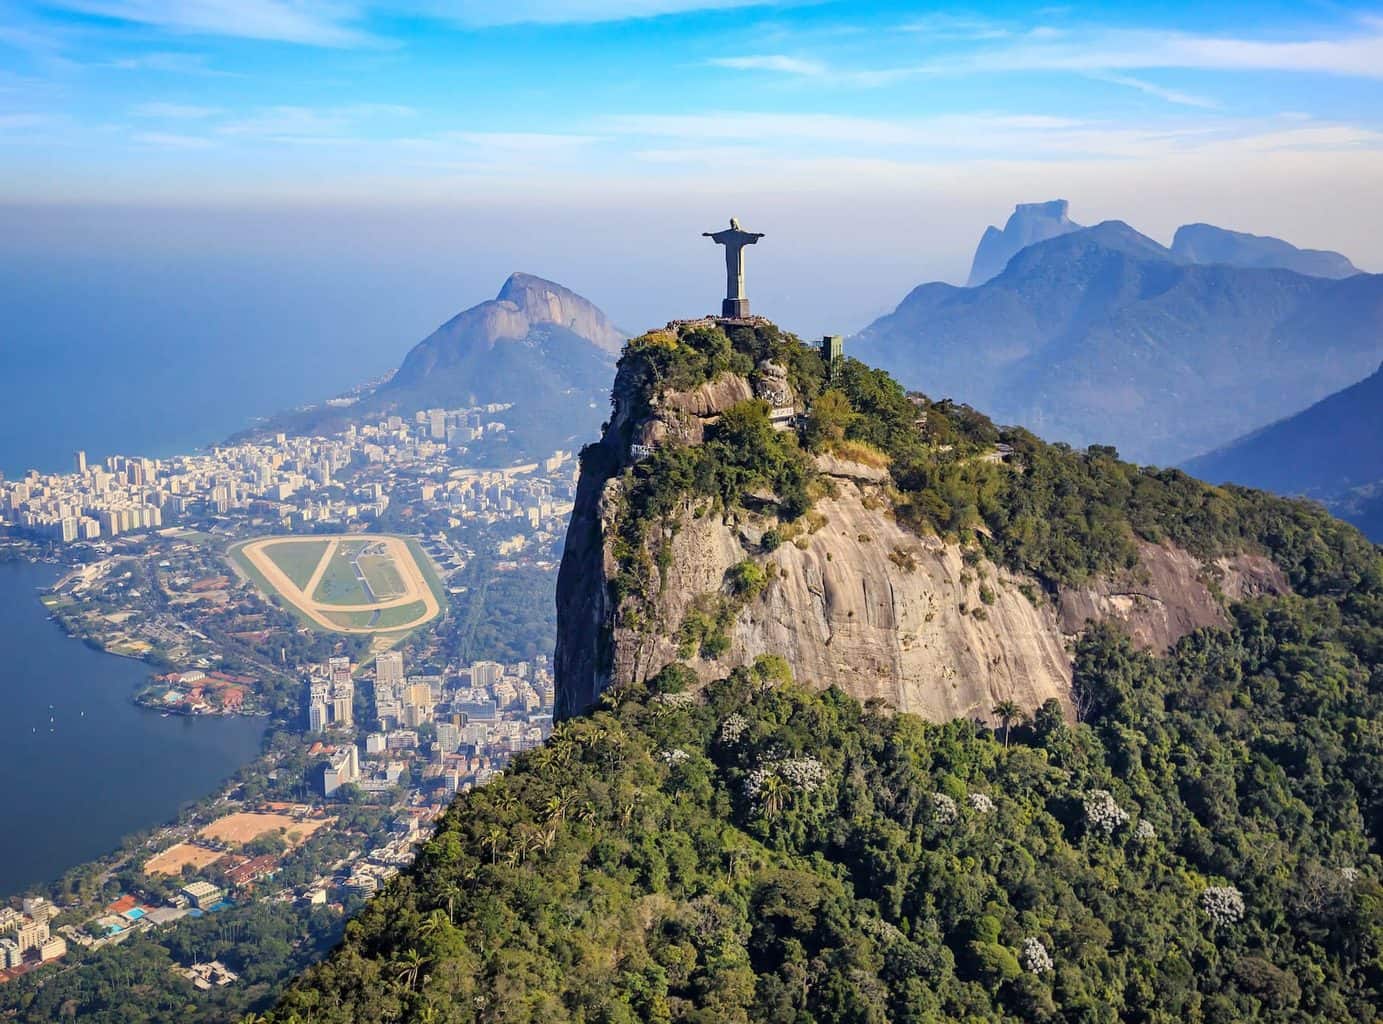 Luxury Holidays to Rio De Janeiro - landscape shot with Christ the Redeemer Statue in view